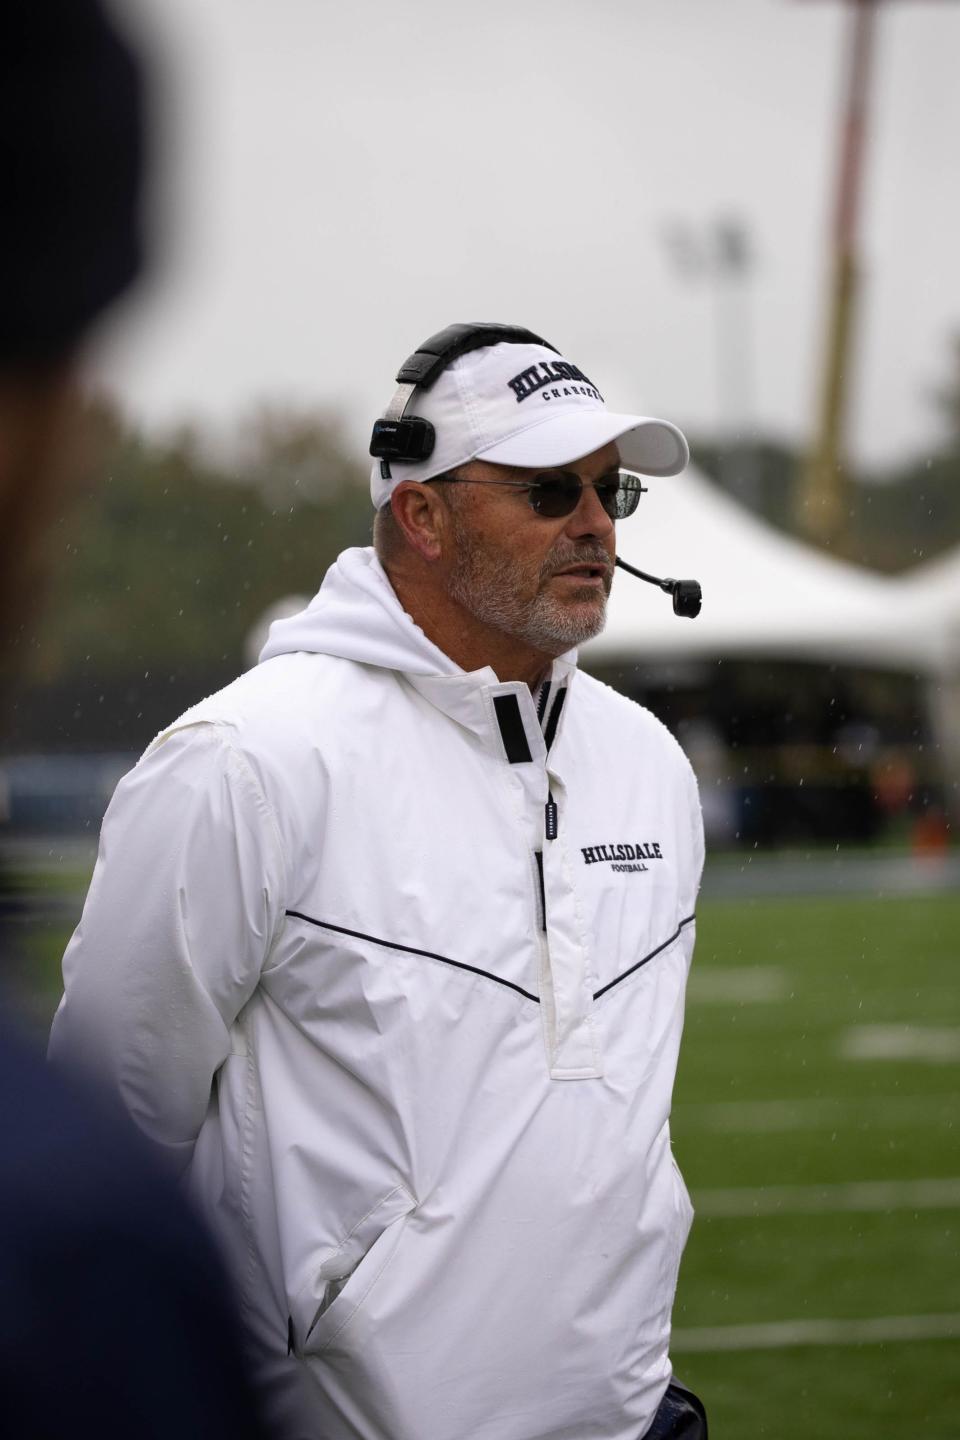 After 22 years, Keith Otterbein retires as head coach of Hillsdale College Football.